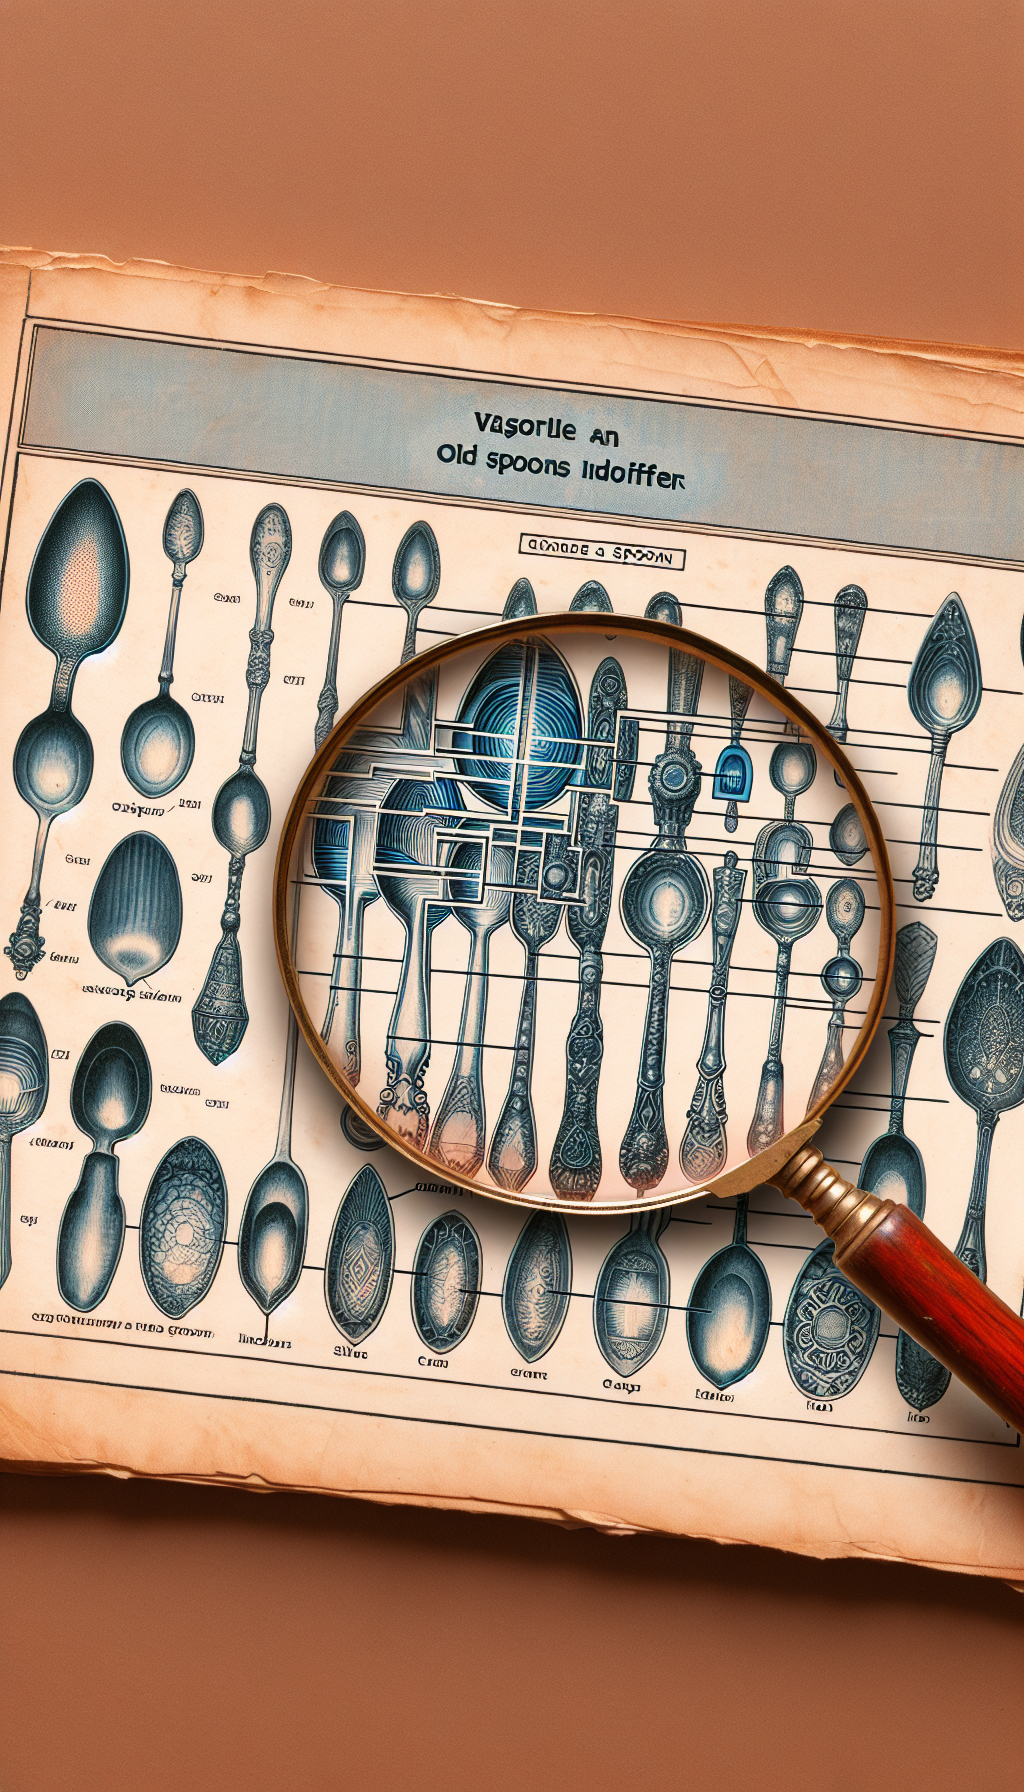 An illustration depicts a magnifying glass hovering over a cross-section of ancient spoons, each layer representing a different metal such as silver, copper, and iron, with intricate patterns etched subtly within. To the side, a flowchart with labeled icons leads from each spoon to its era and origin, serving as an 'old spoons identifier' guide.